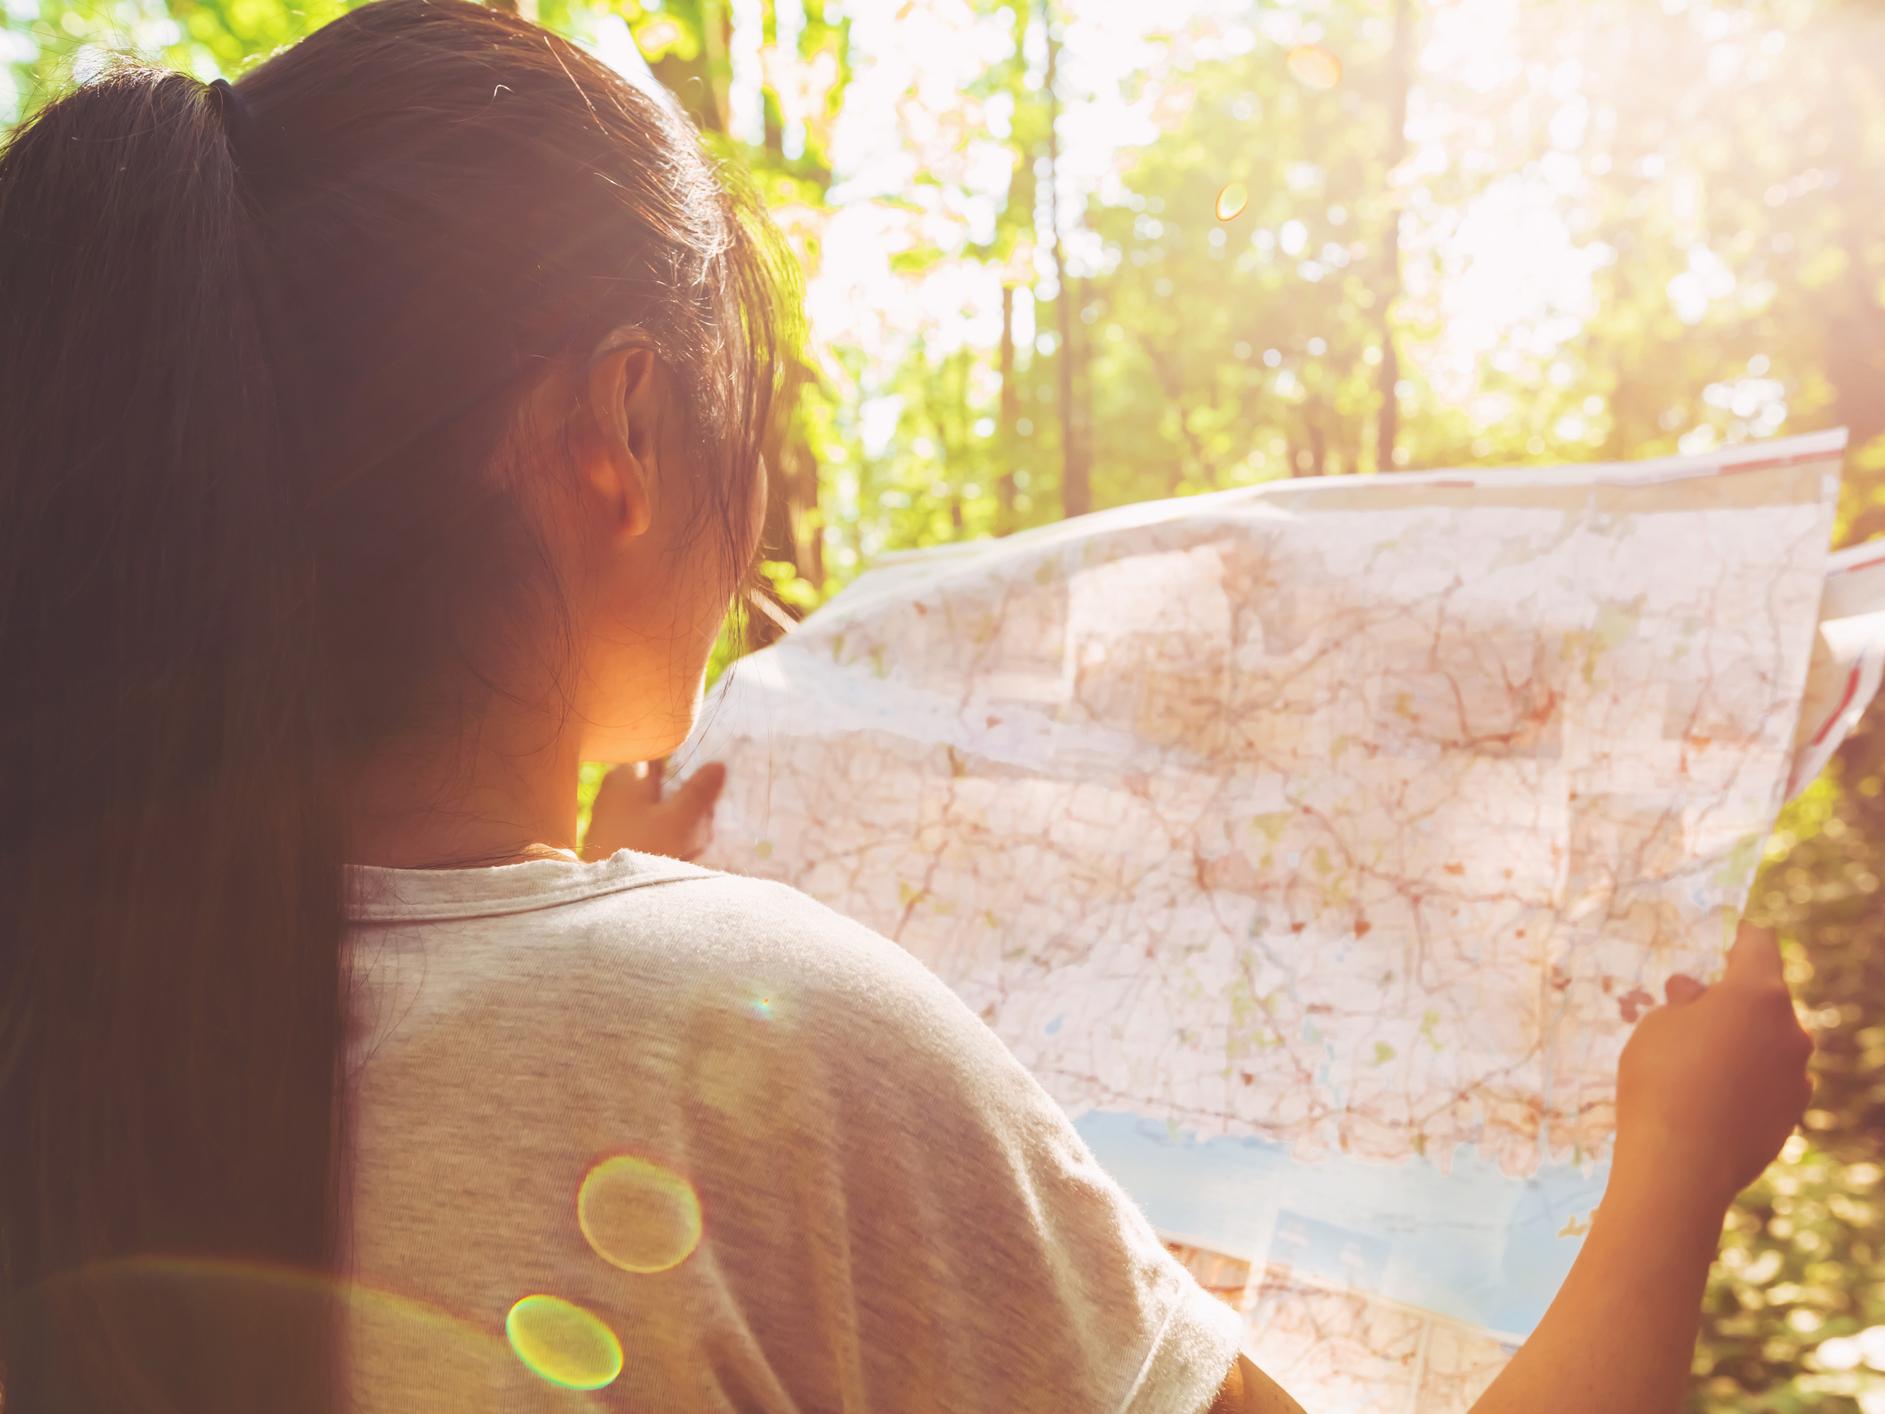 Researchers found that six in 10 millennials always 'rely' on their smartphone map when going somewhere new